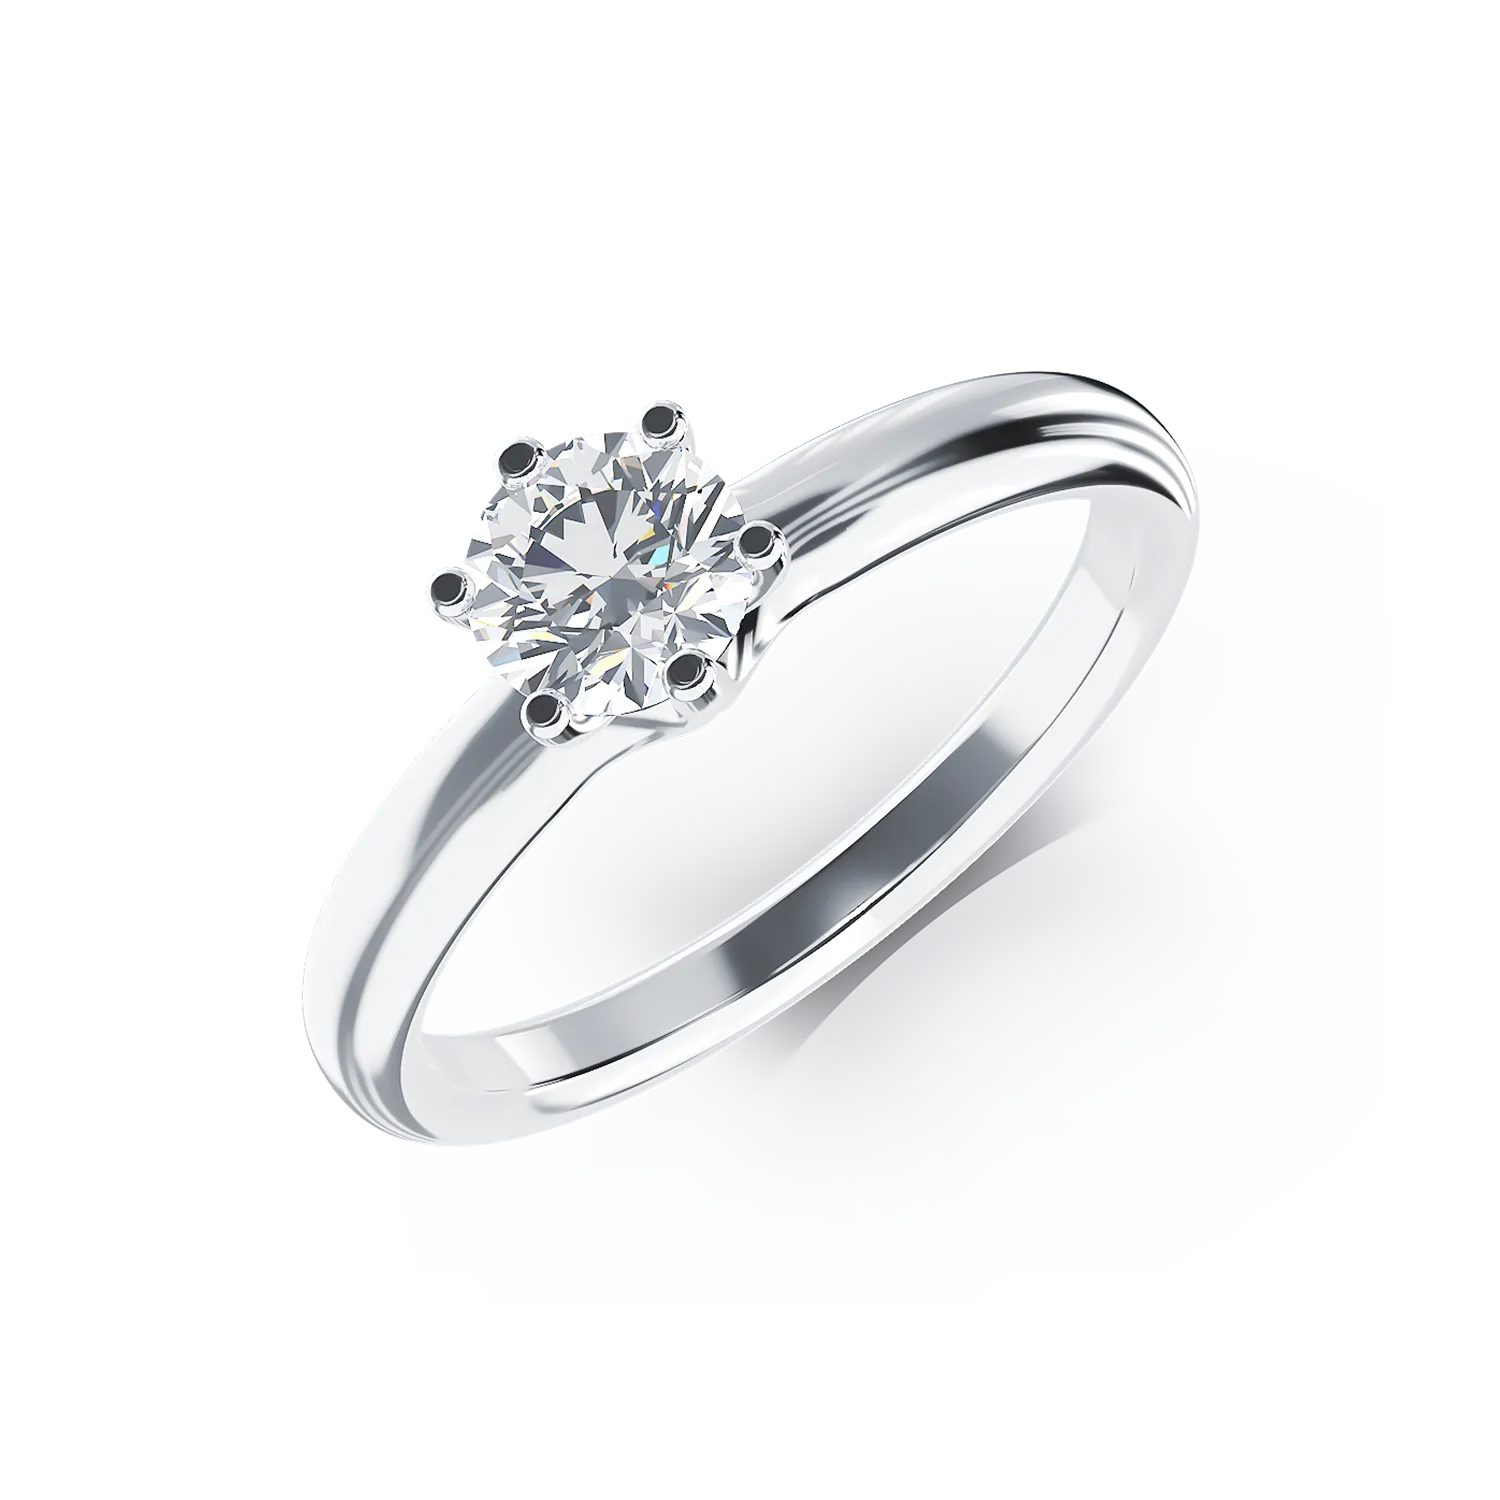 18k white gold engagement ring with a 0.5ct diamond